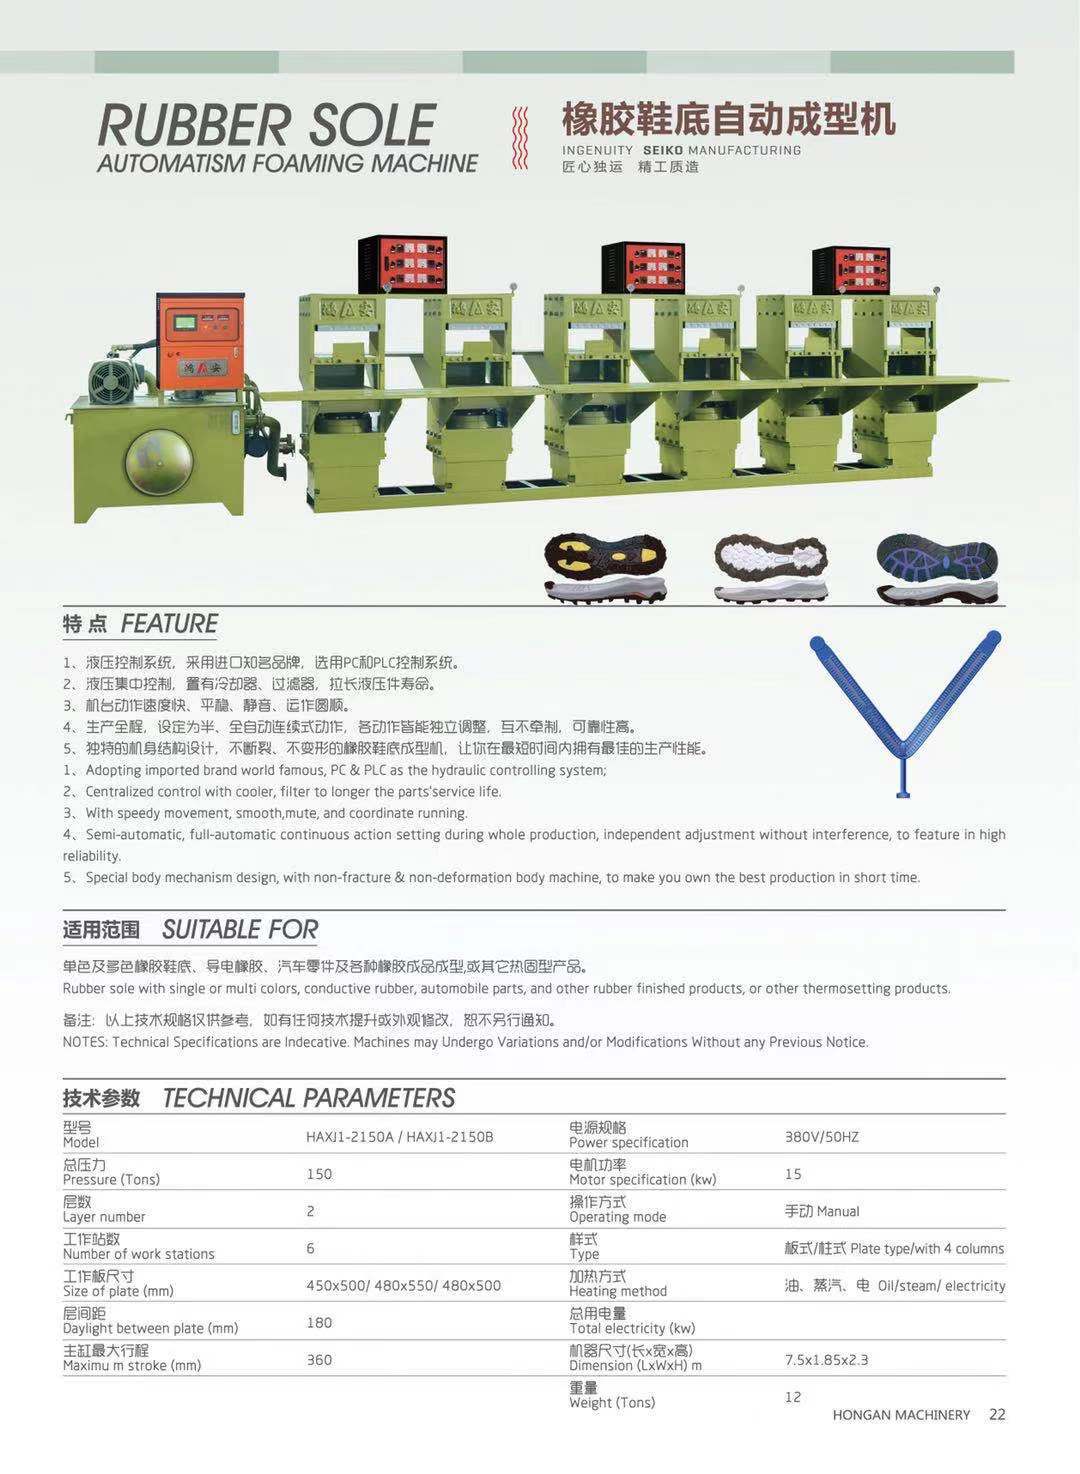 Rubber sole automatism foaming machine